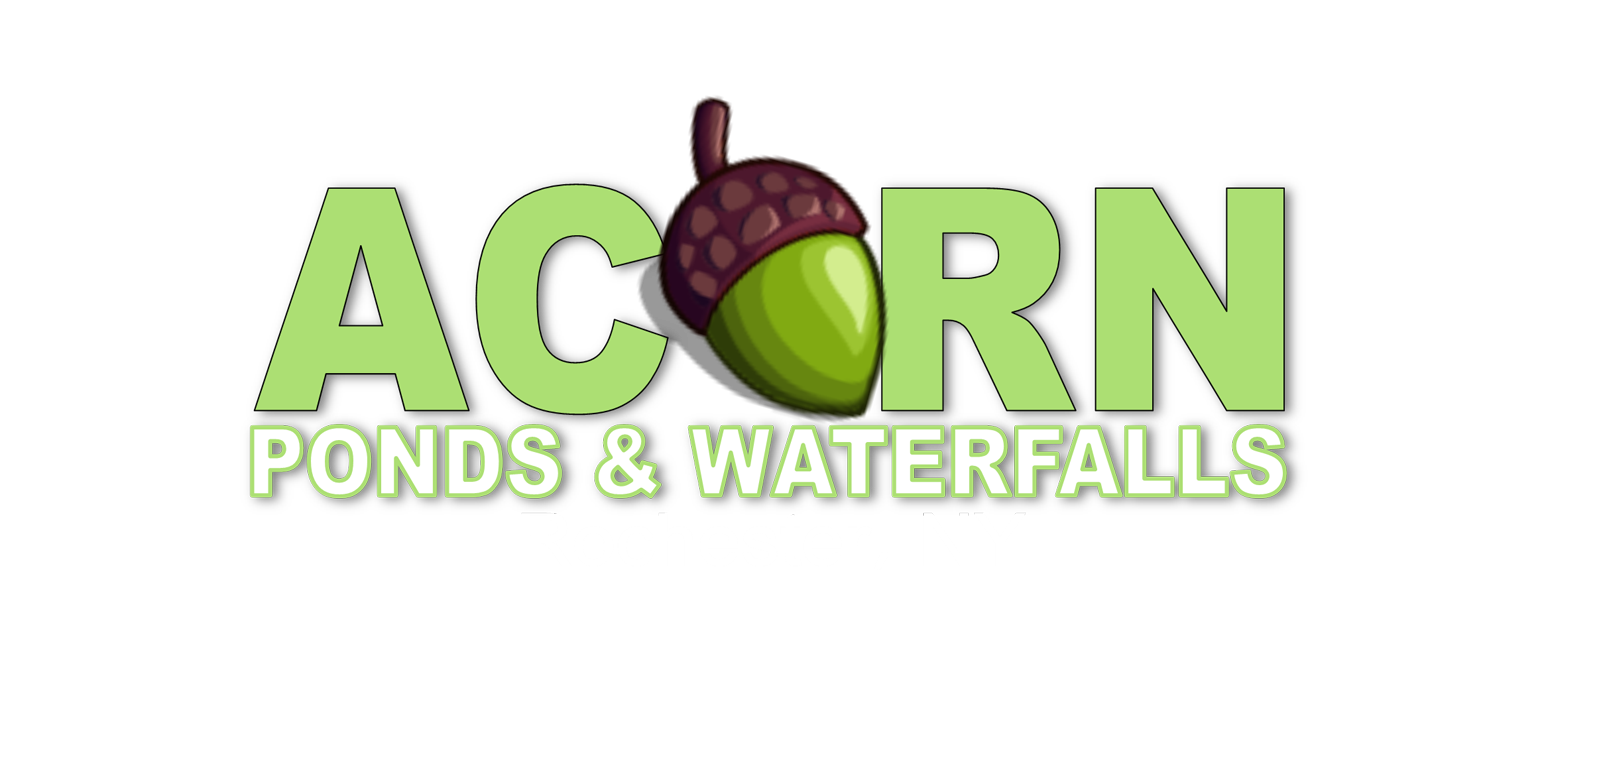 Pond-Waterfall Leak Detection & Repair Service In Rochester Monroe County NY By Acorn